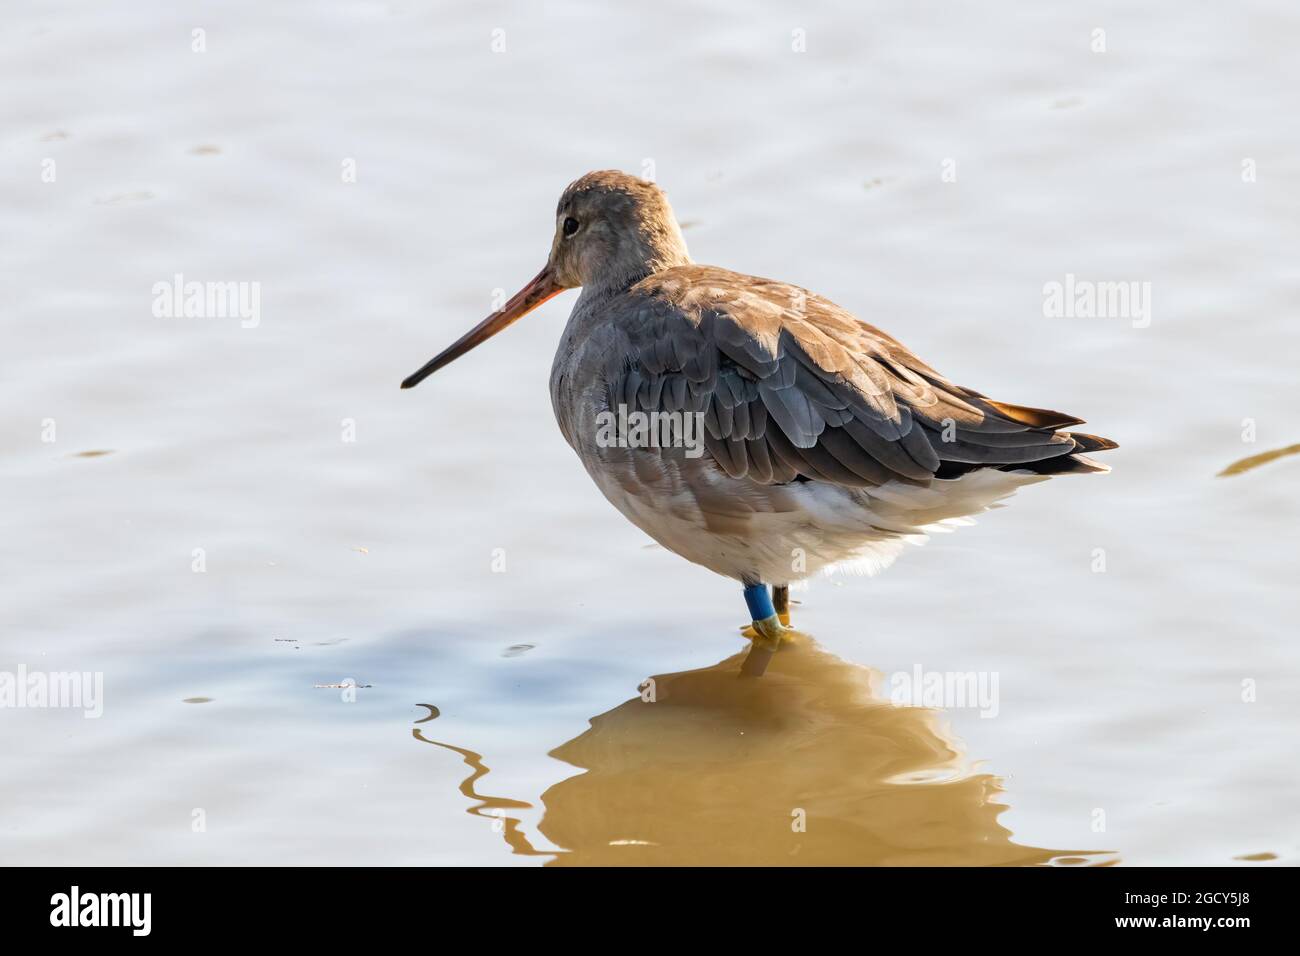 Black-tailed godwit (Limosa haemastica), caradriform bird of the Scolopacidae family. One of Largest and most showy European waders, with a lot of col Stock Photo